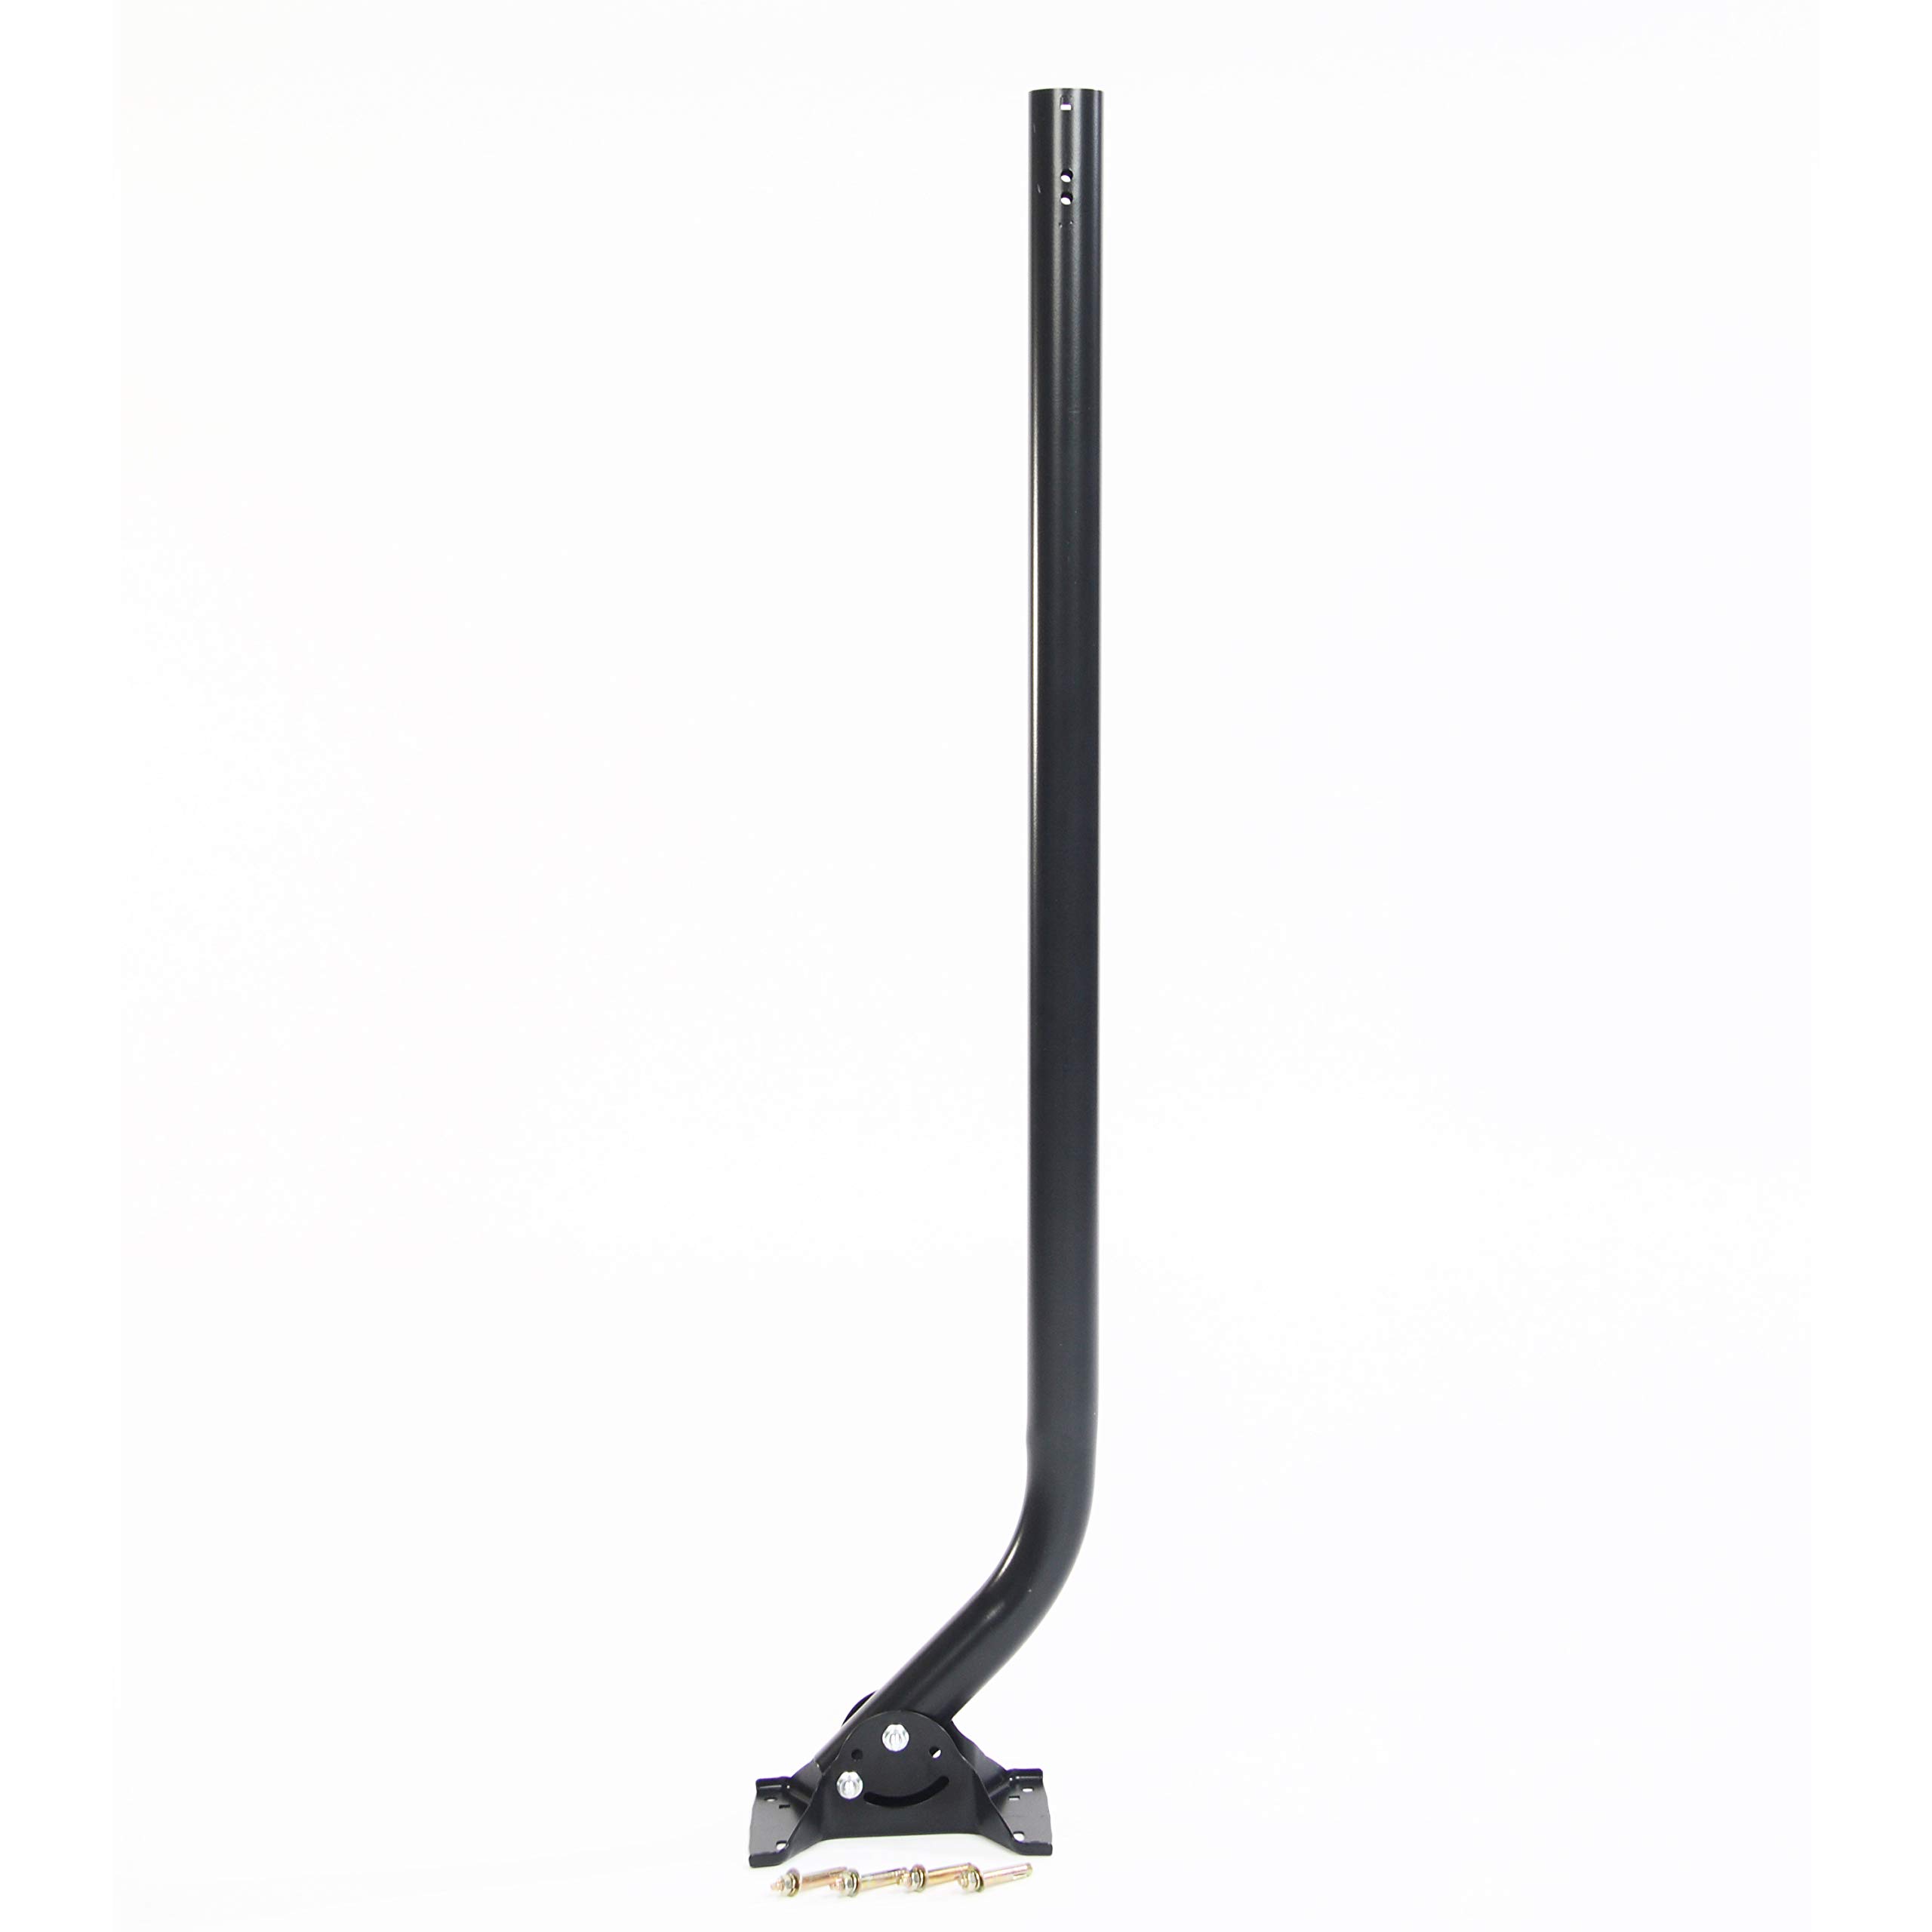 Antennas Direct 40in TV Antenna Mount with Pivoting Base, 1-5/8in OD, All Weather Mounting Hardware, Adjustable Mast Clamp, Roof Sealing Pads - STM-1000 (STM1000)